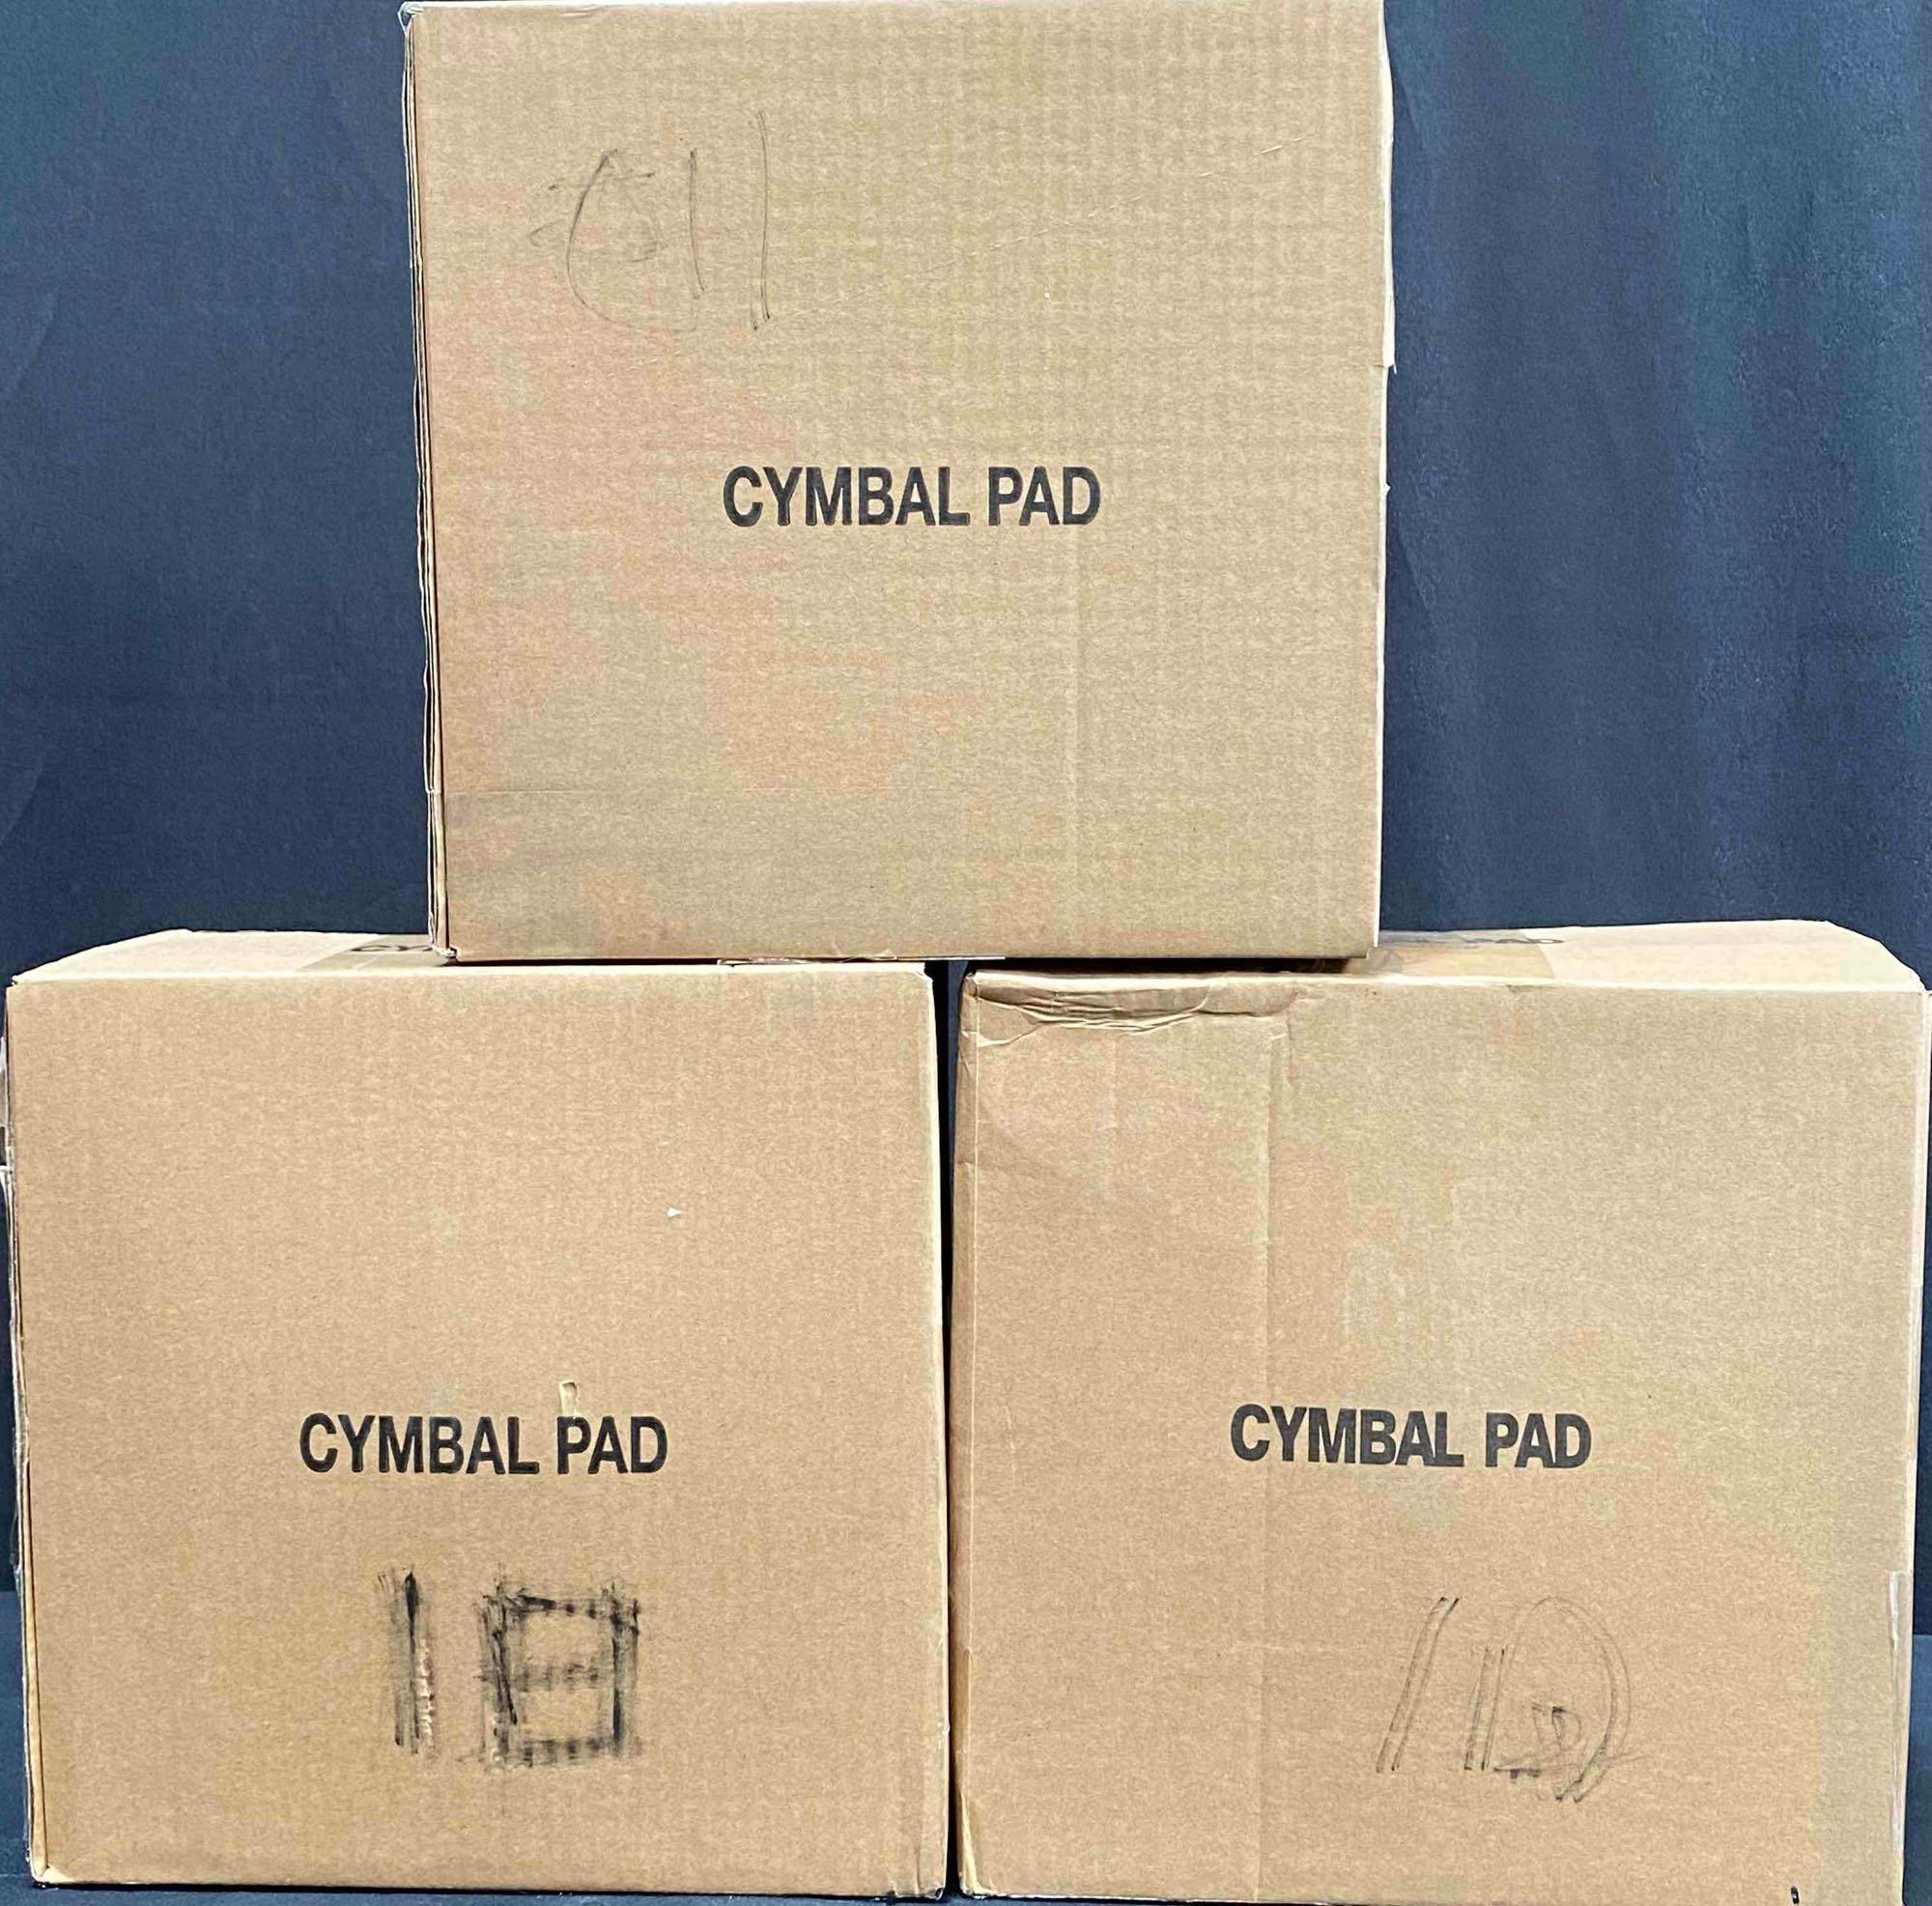 3 Box of DONNER CYMBAL PAD DED-80 ELECTRONIC DRUM